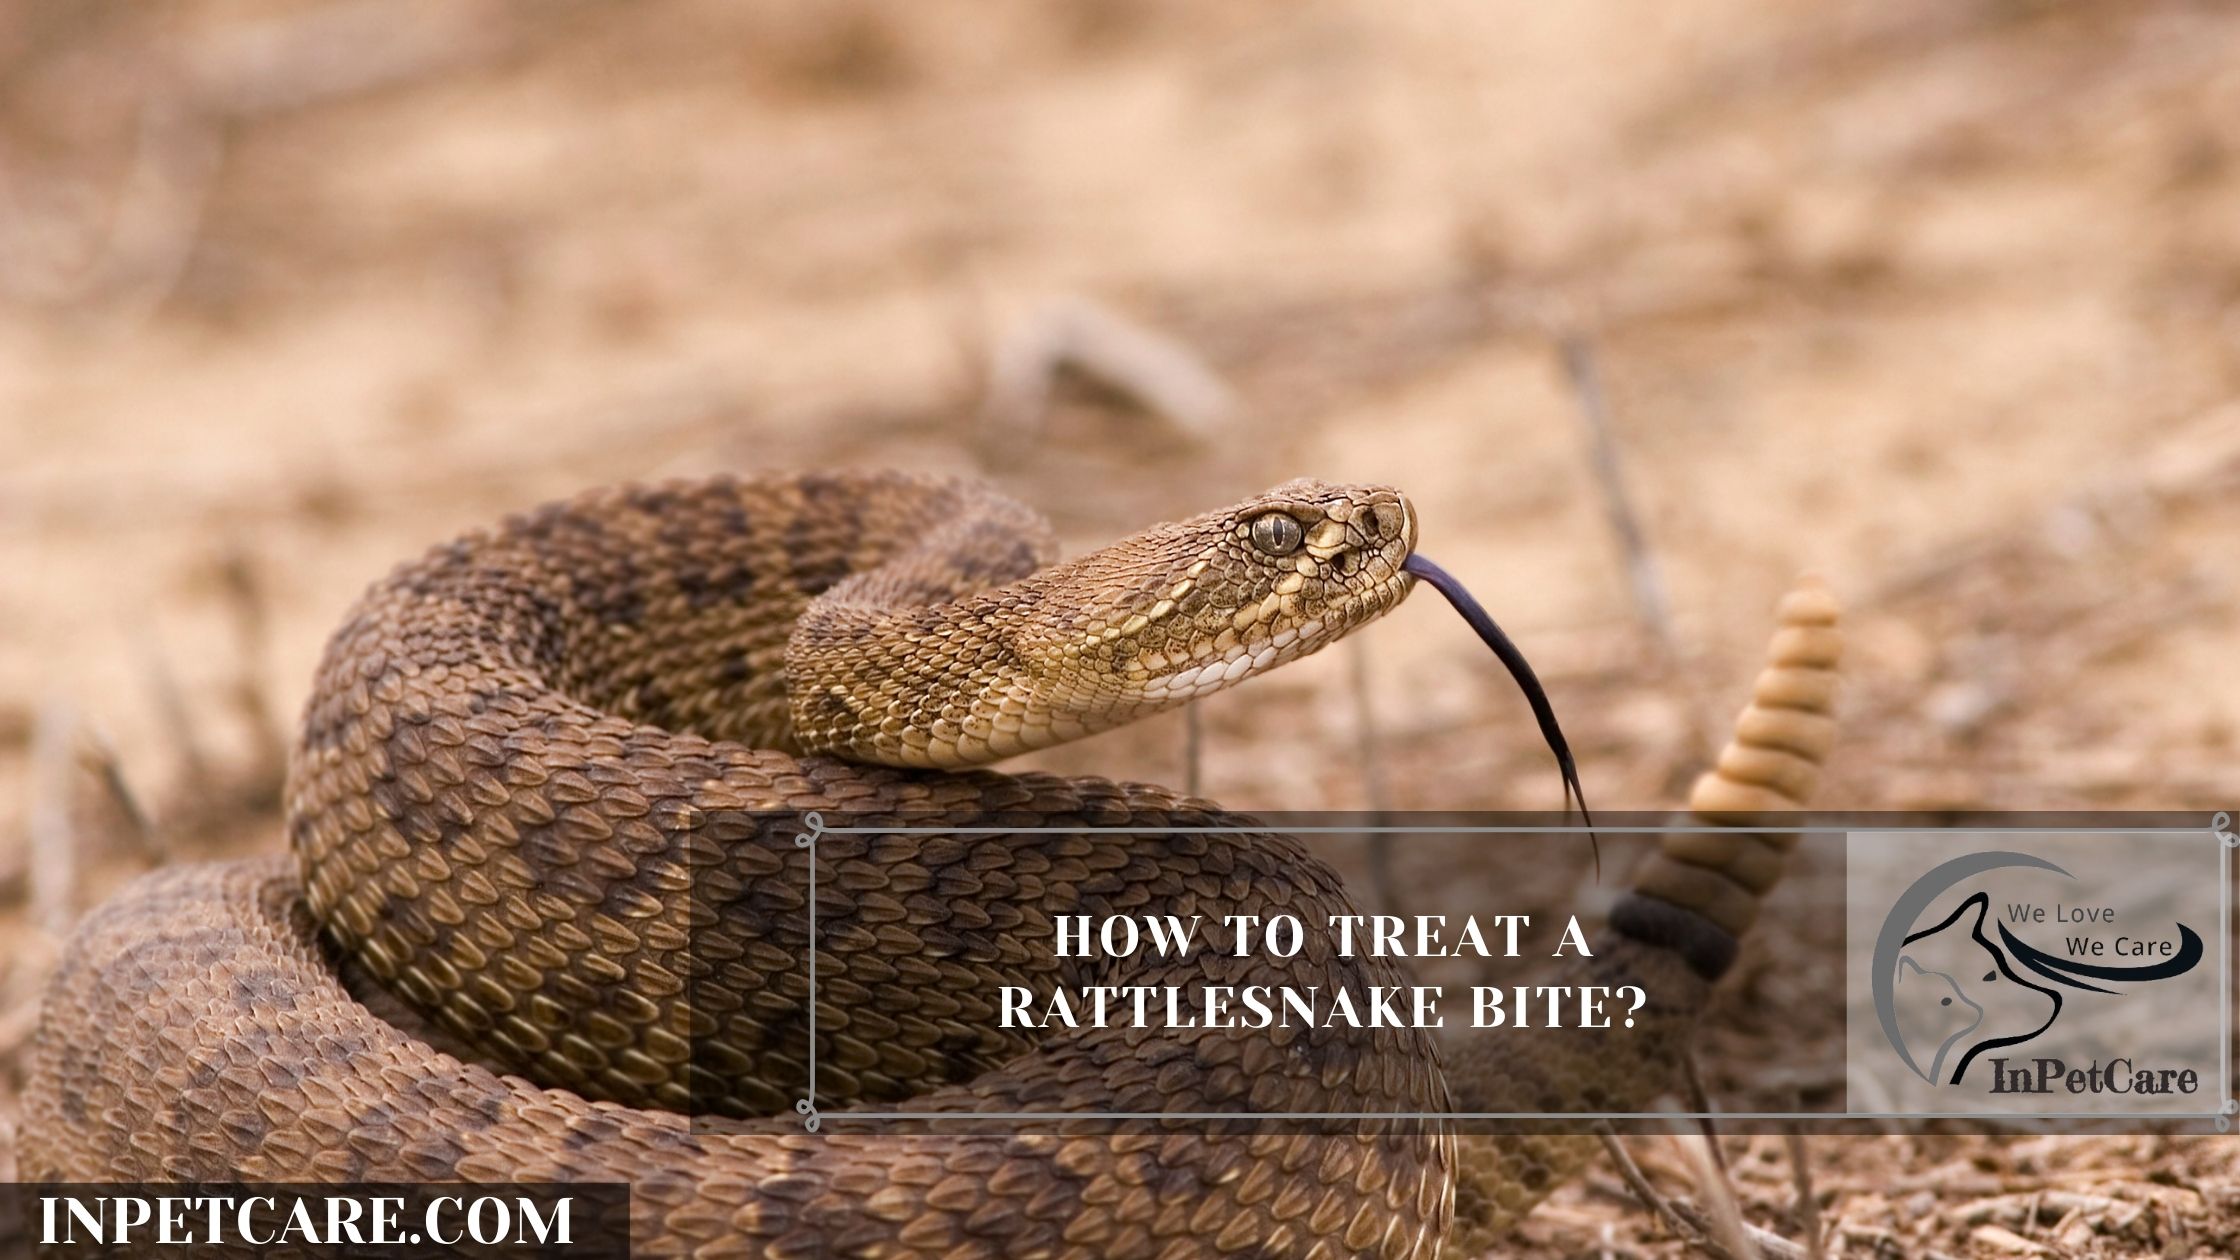 How To Treat a Rattlesnake Bite?